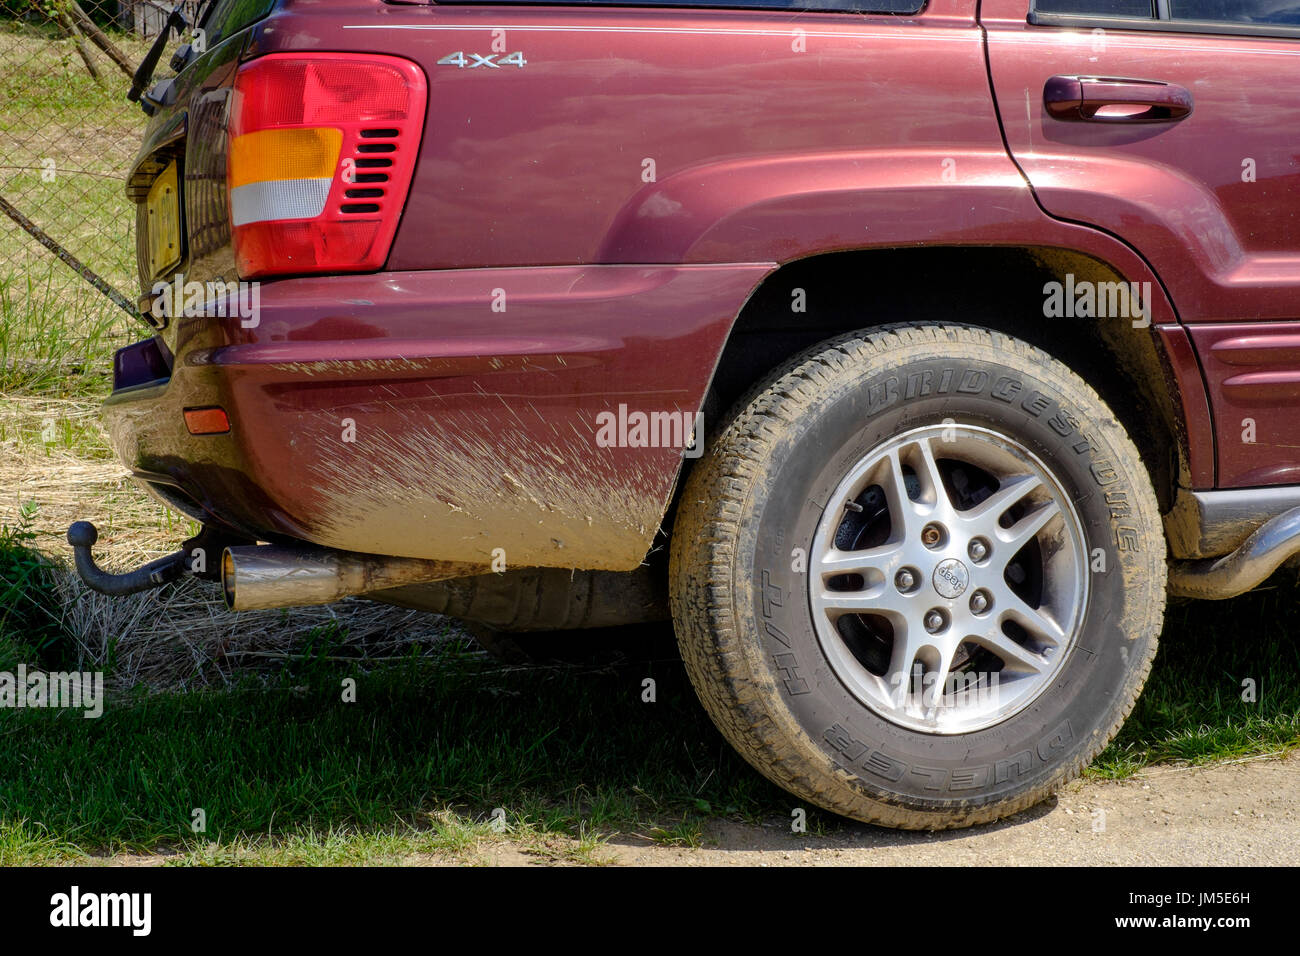 jeep 4x4 suv vehicle with uk number plates parked in a rural country lane at a village in zala county hungary Stock Photo